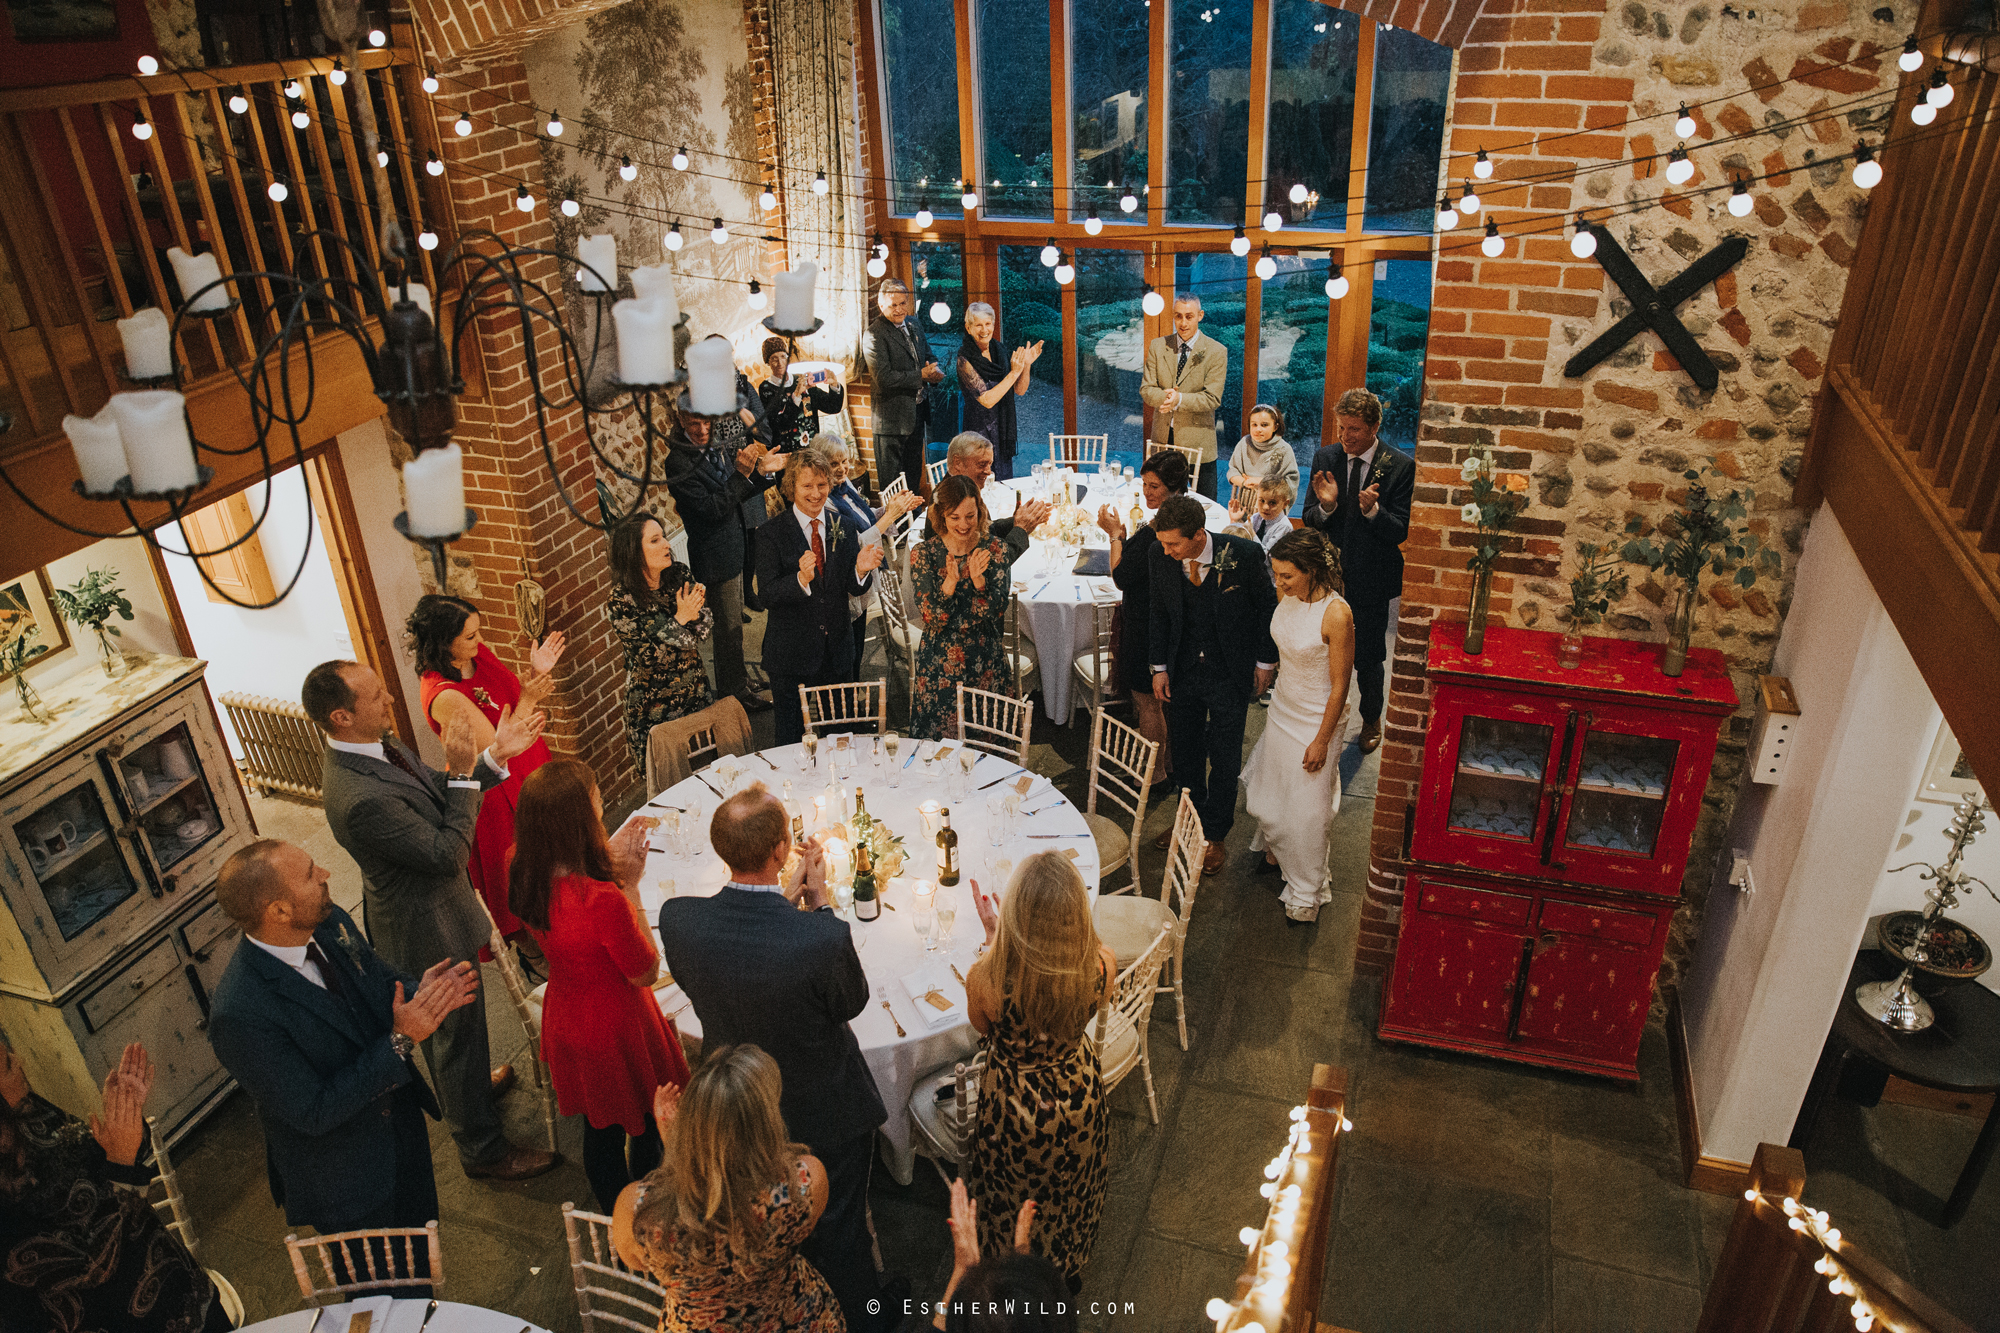 Wedding_Photographer_Chaucer_Barn_Holt_Norfolk_Country_Rustic_Venue_Copyright_Esther_Wild_IMG_1523.jpg